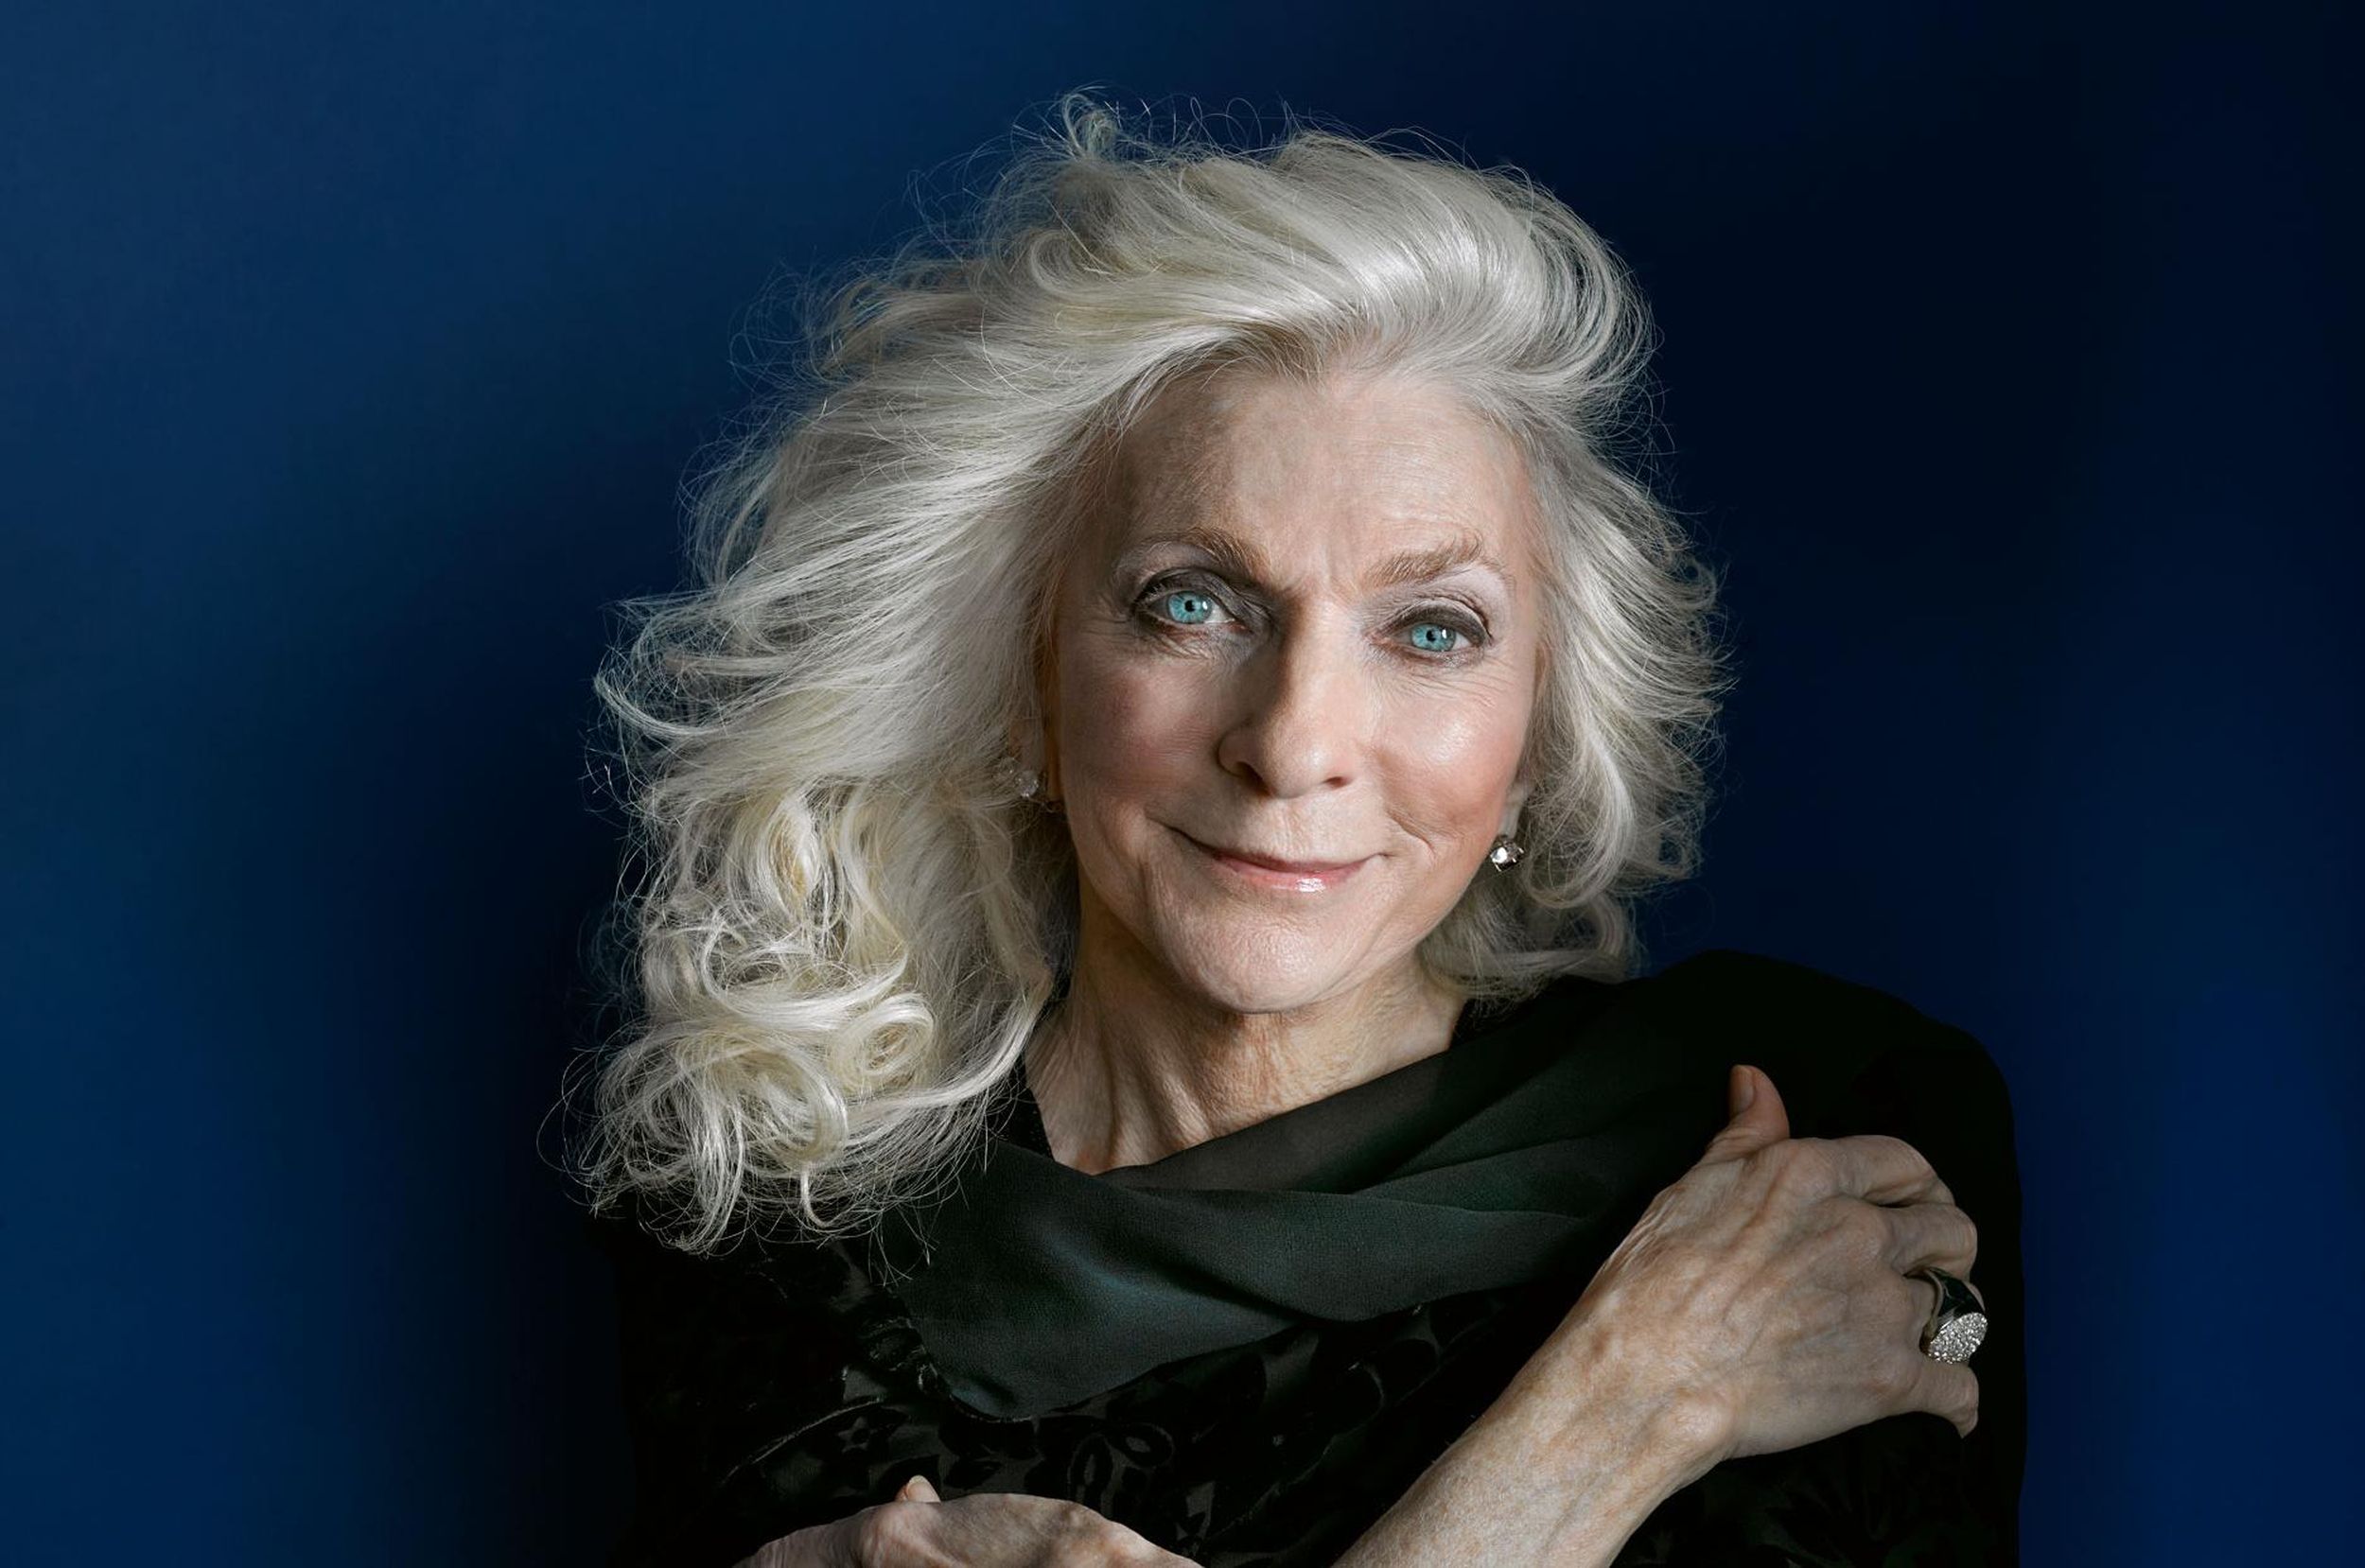 Legendary folk singer Judy Collins keeps the noteworthy projects coming